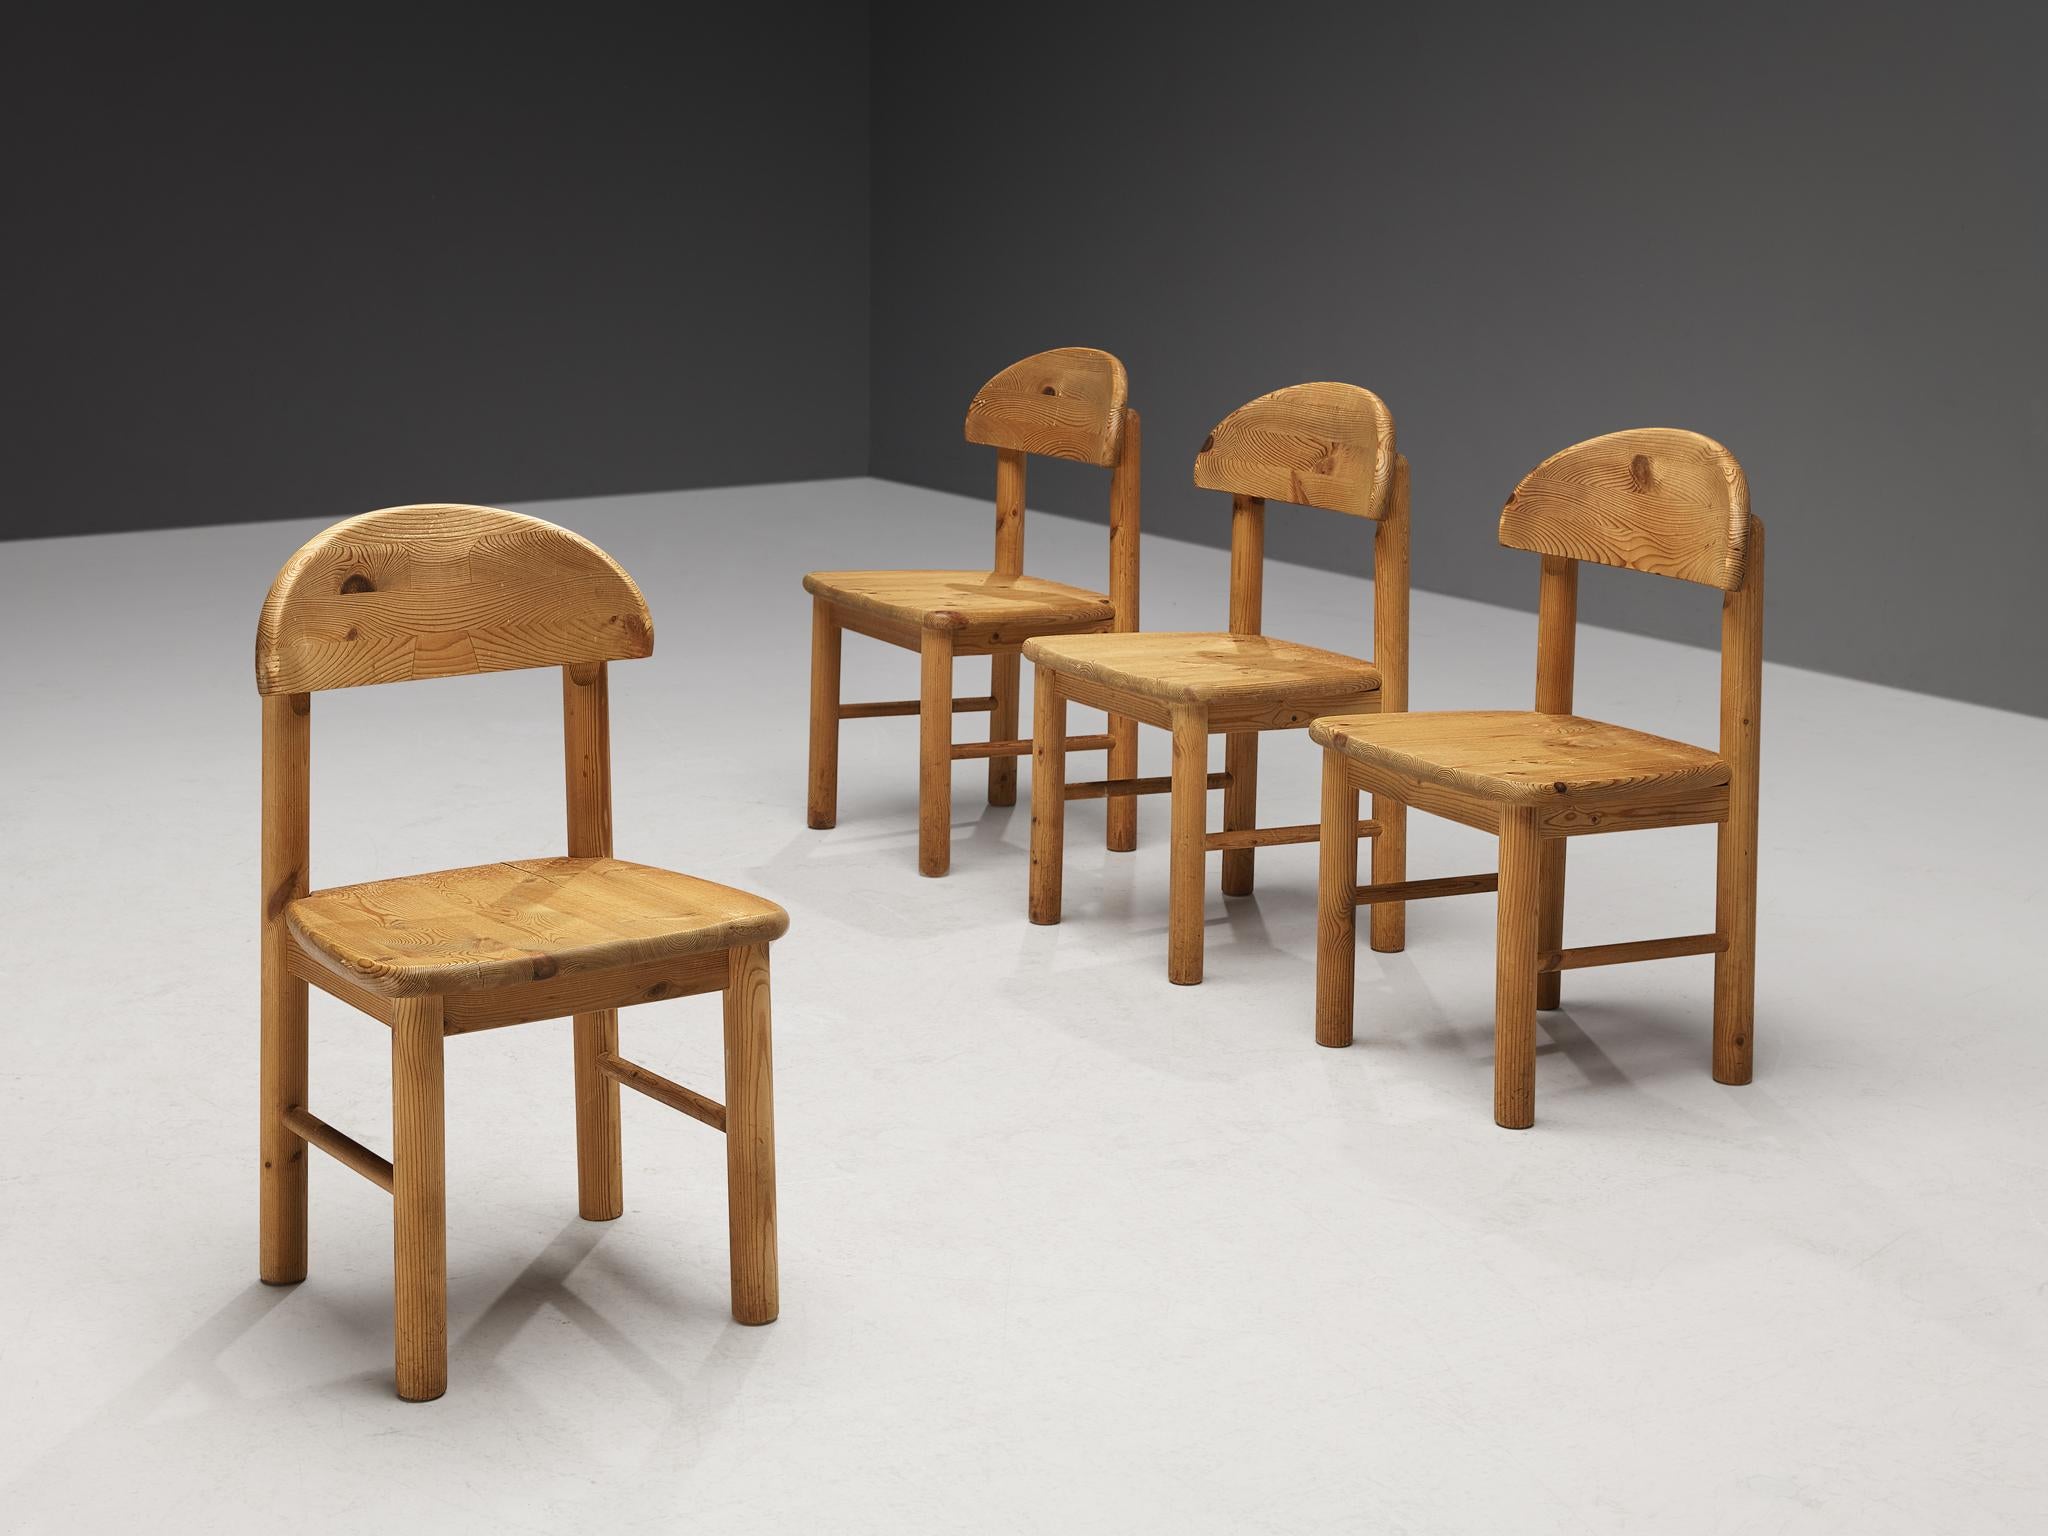 Rainer Daumiller for Hirtshals Sawmill, set of four dining chairs, pine, Denmark, 1970s.

Beautiful, organic and natural dining chairs in solid pine designed by Rainer Daumiller. A simplistic design with a round seating and attention for the natural